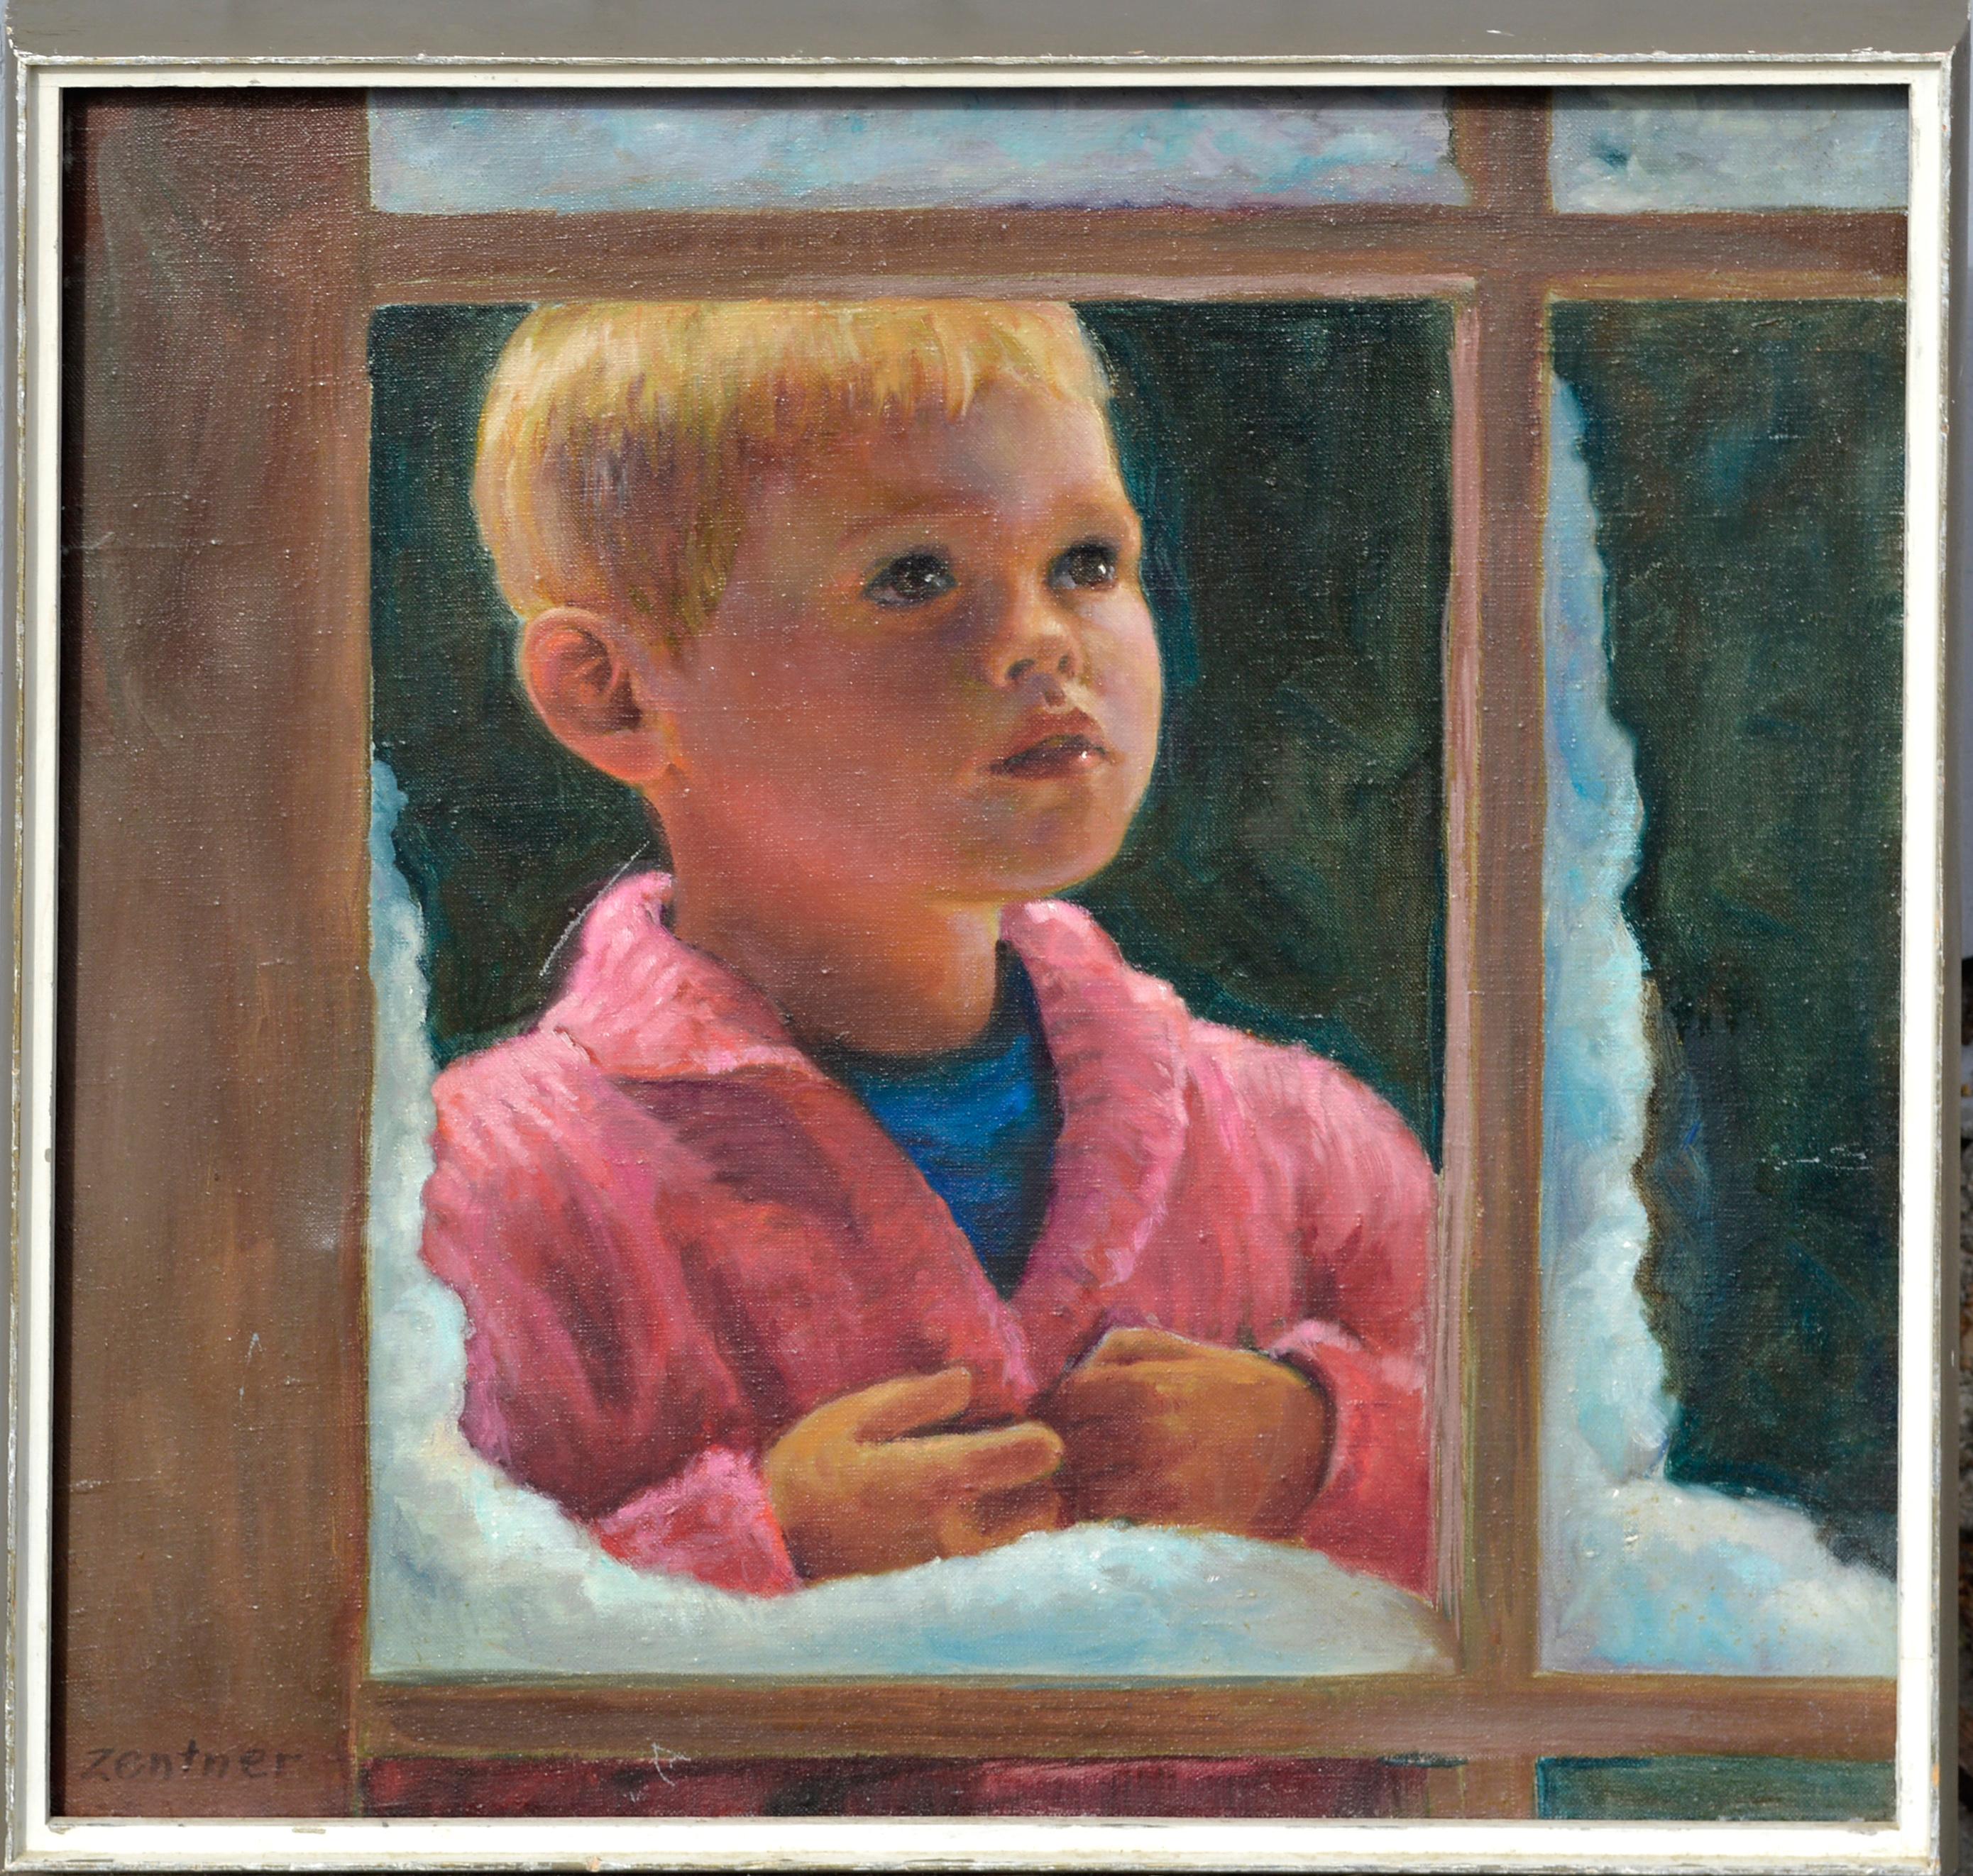 Veon Zentner Portrait Painting - "I See a Robin" - Portrait of a Boy in Winter 